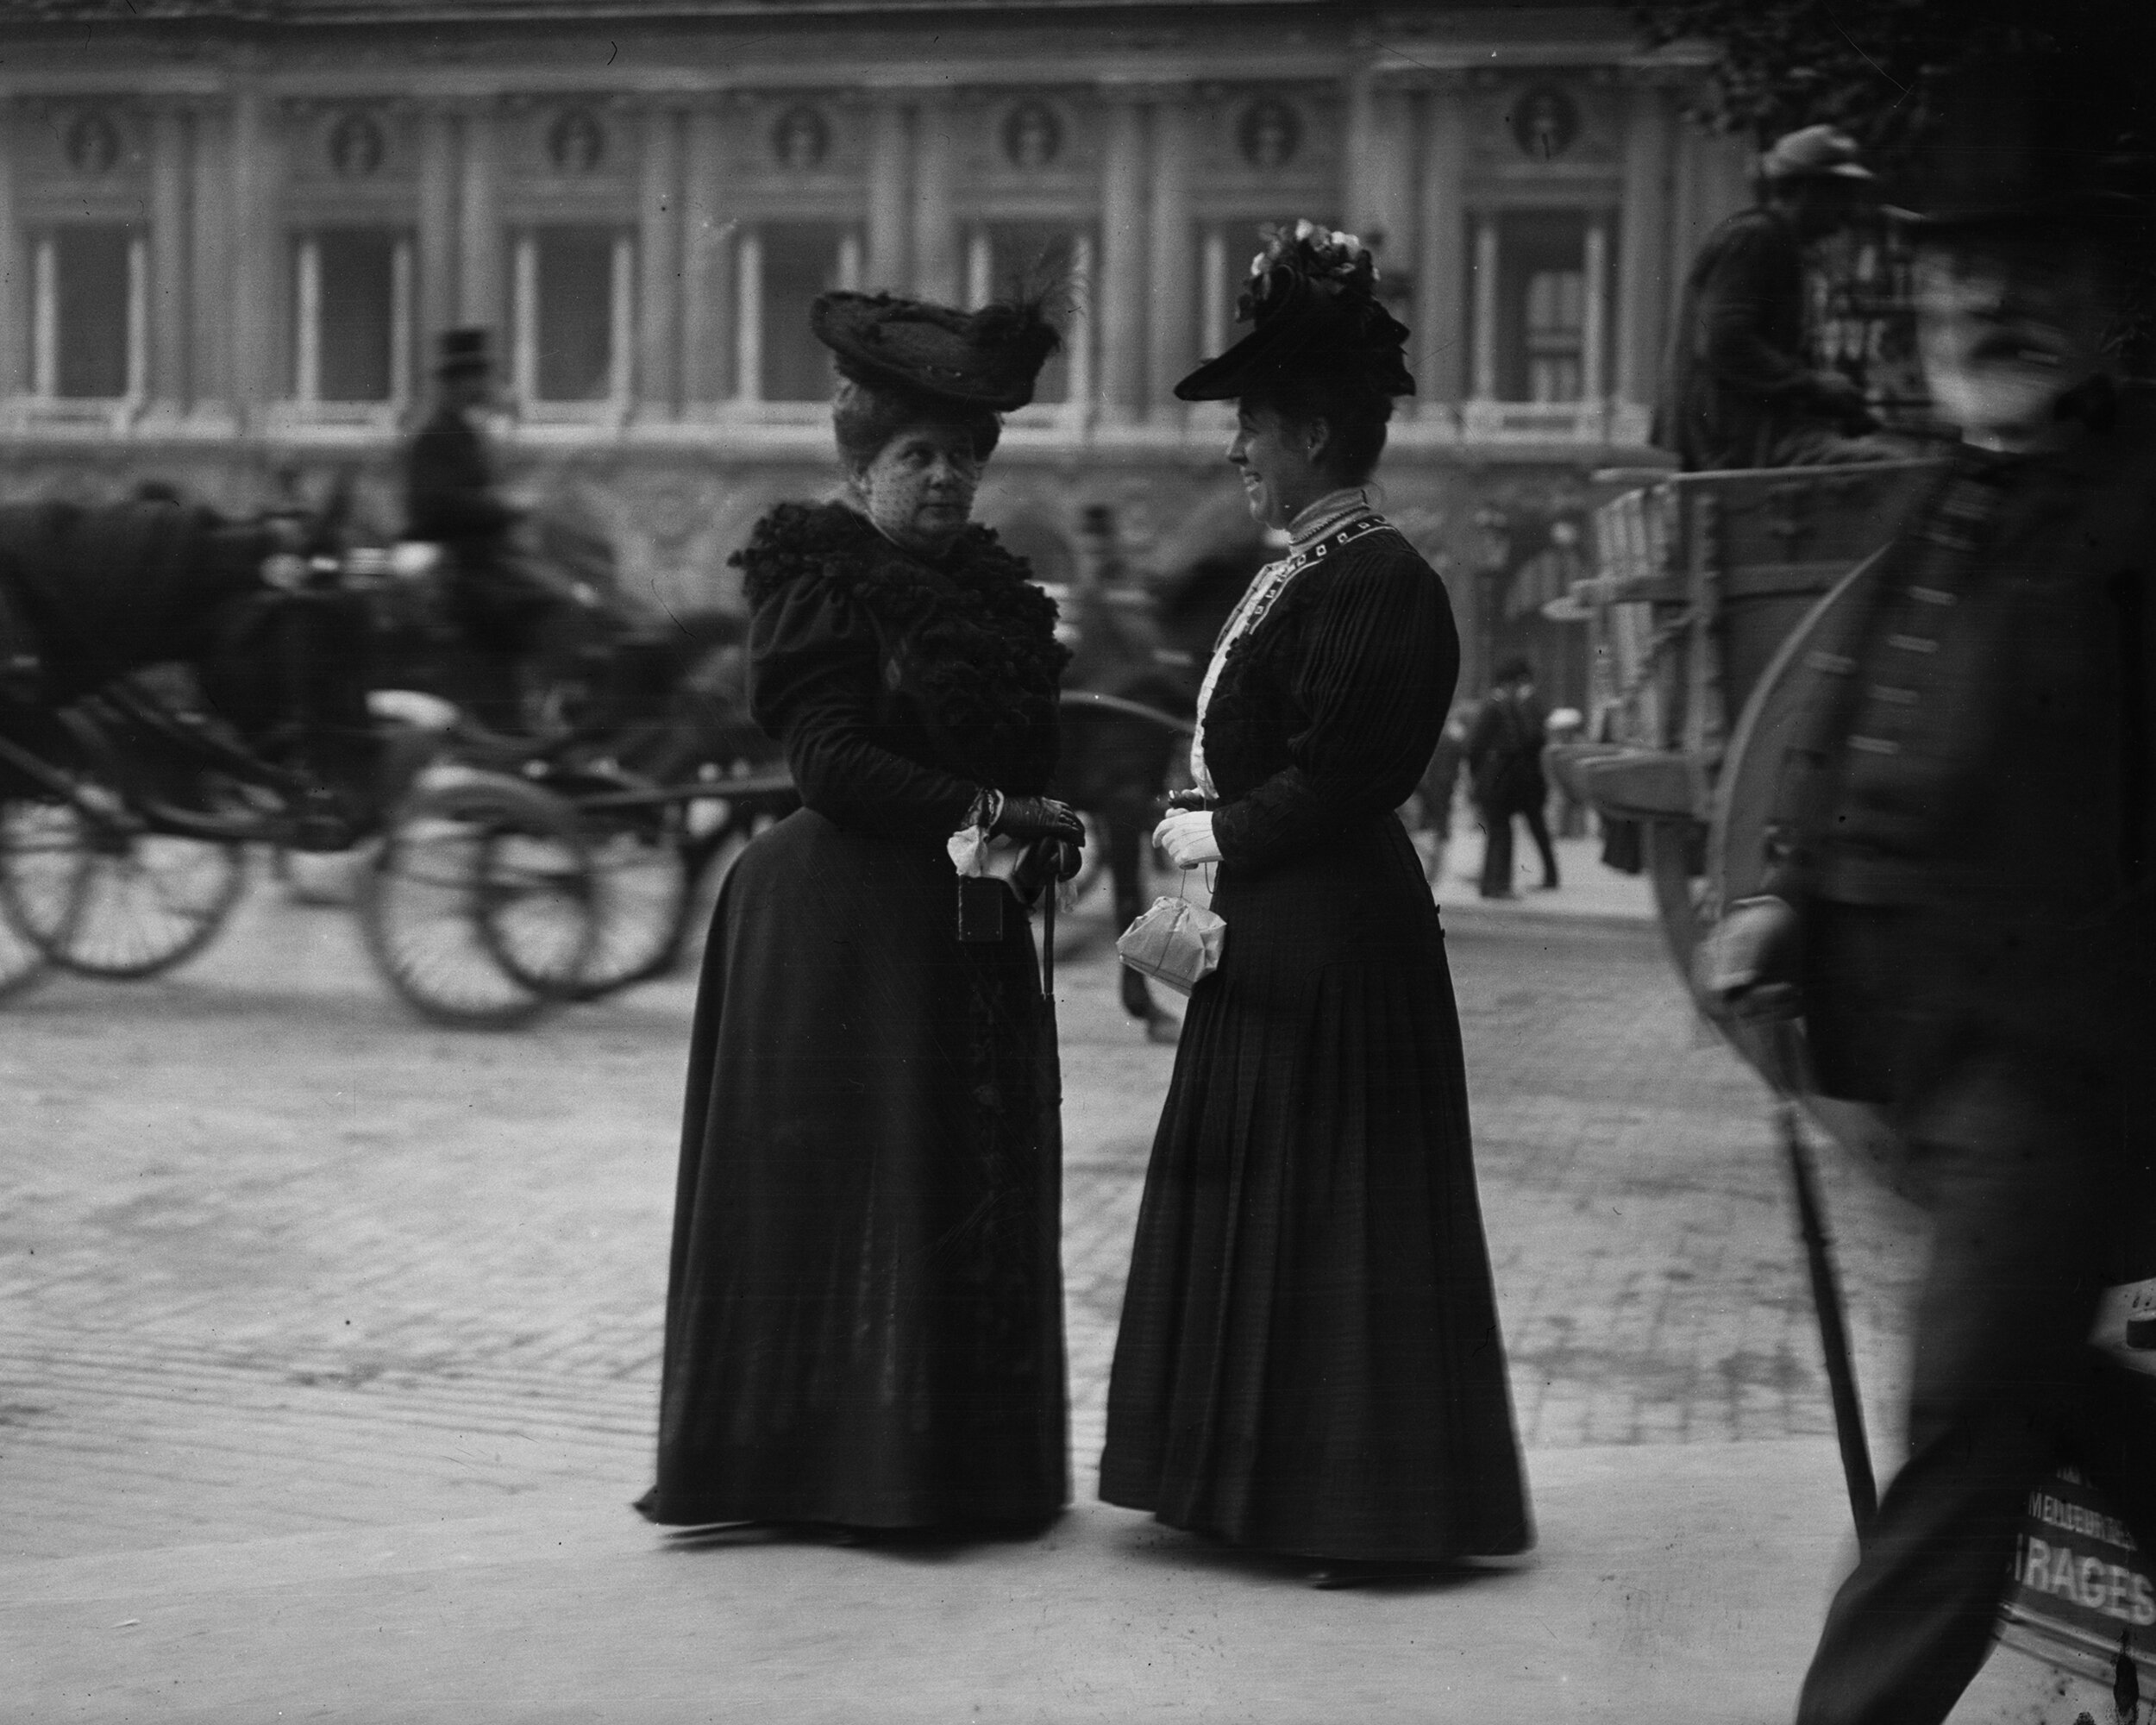   [Gertrude Tate and a friend in front of the Paris Opera], September 16, 1905  Collection of Historic Richmond Town, 50.015.3595 